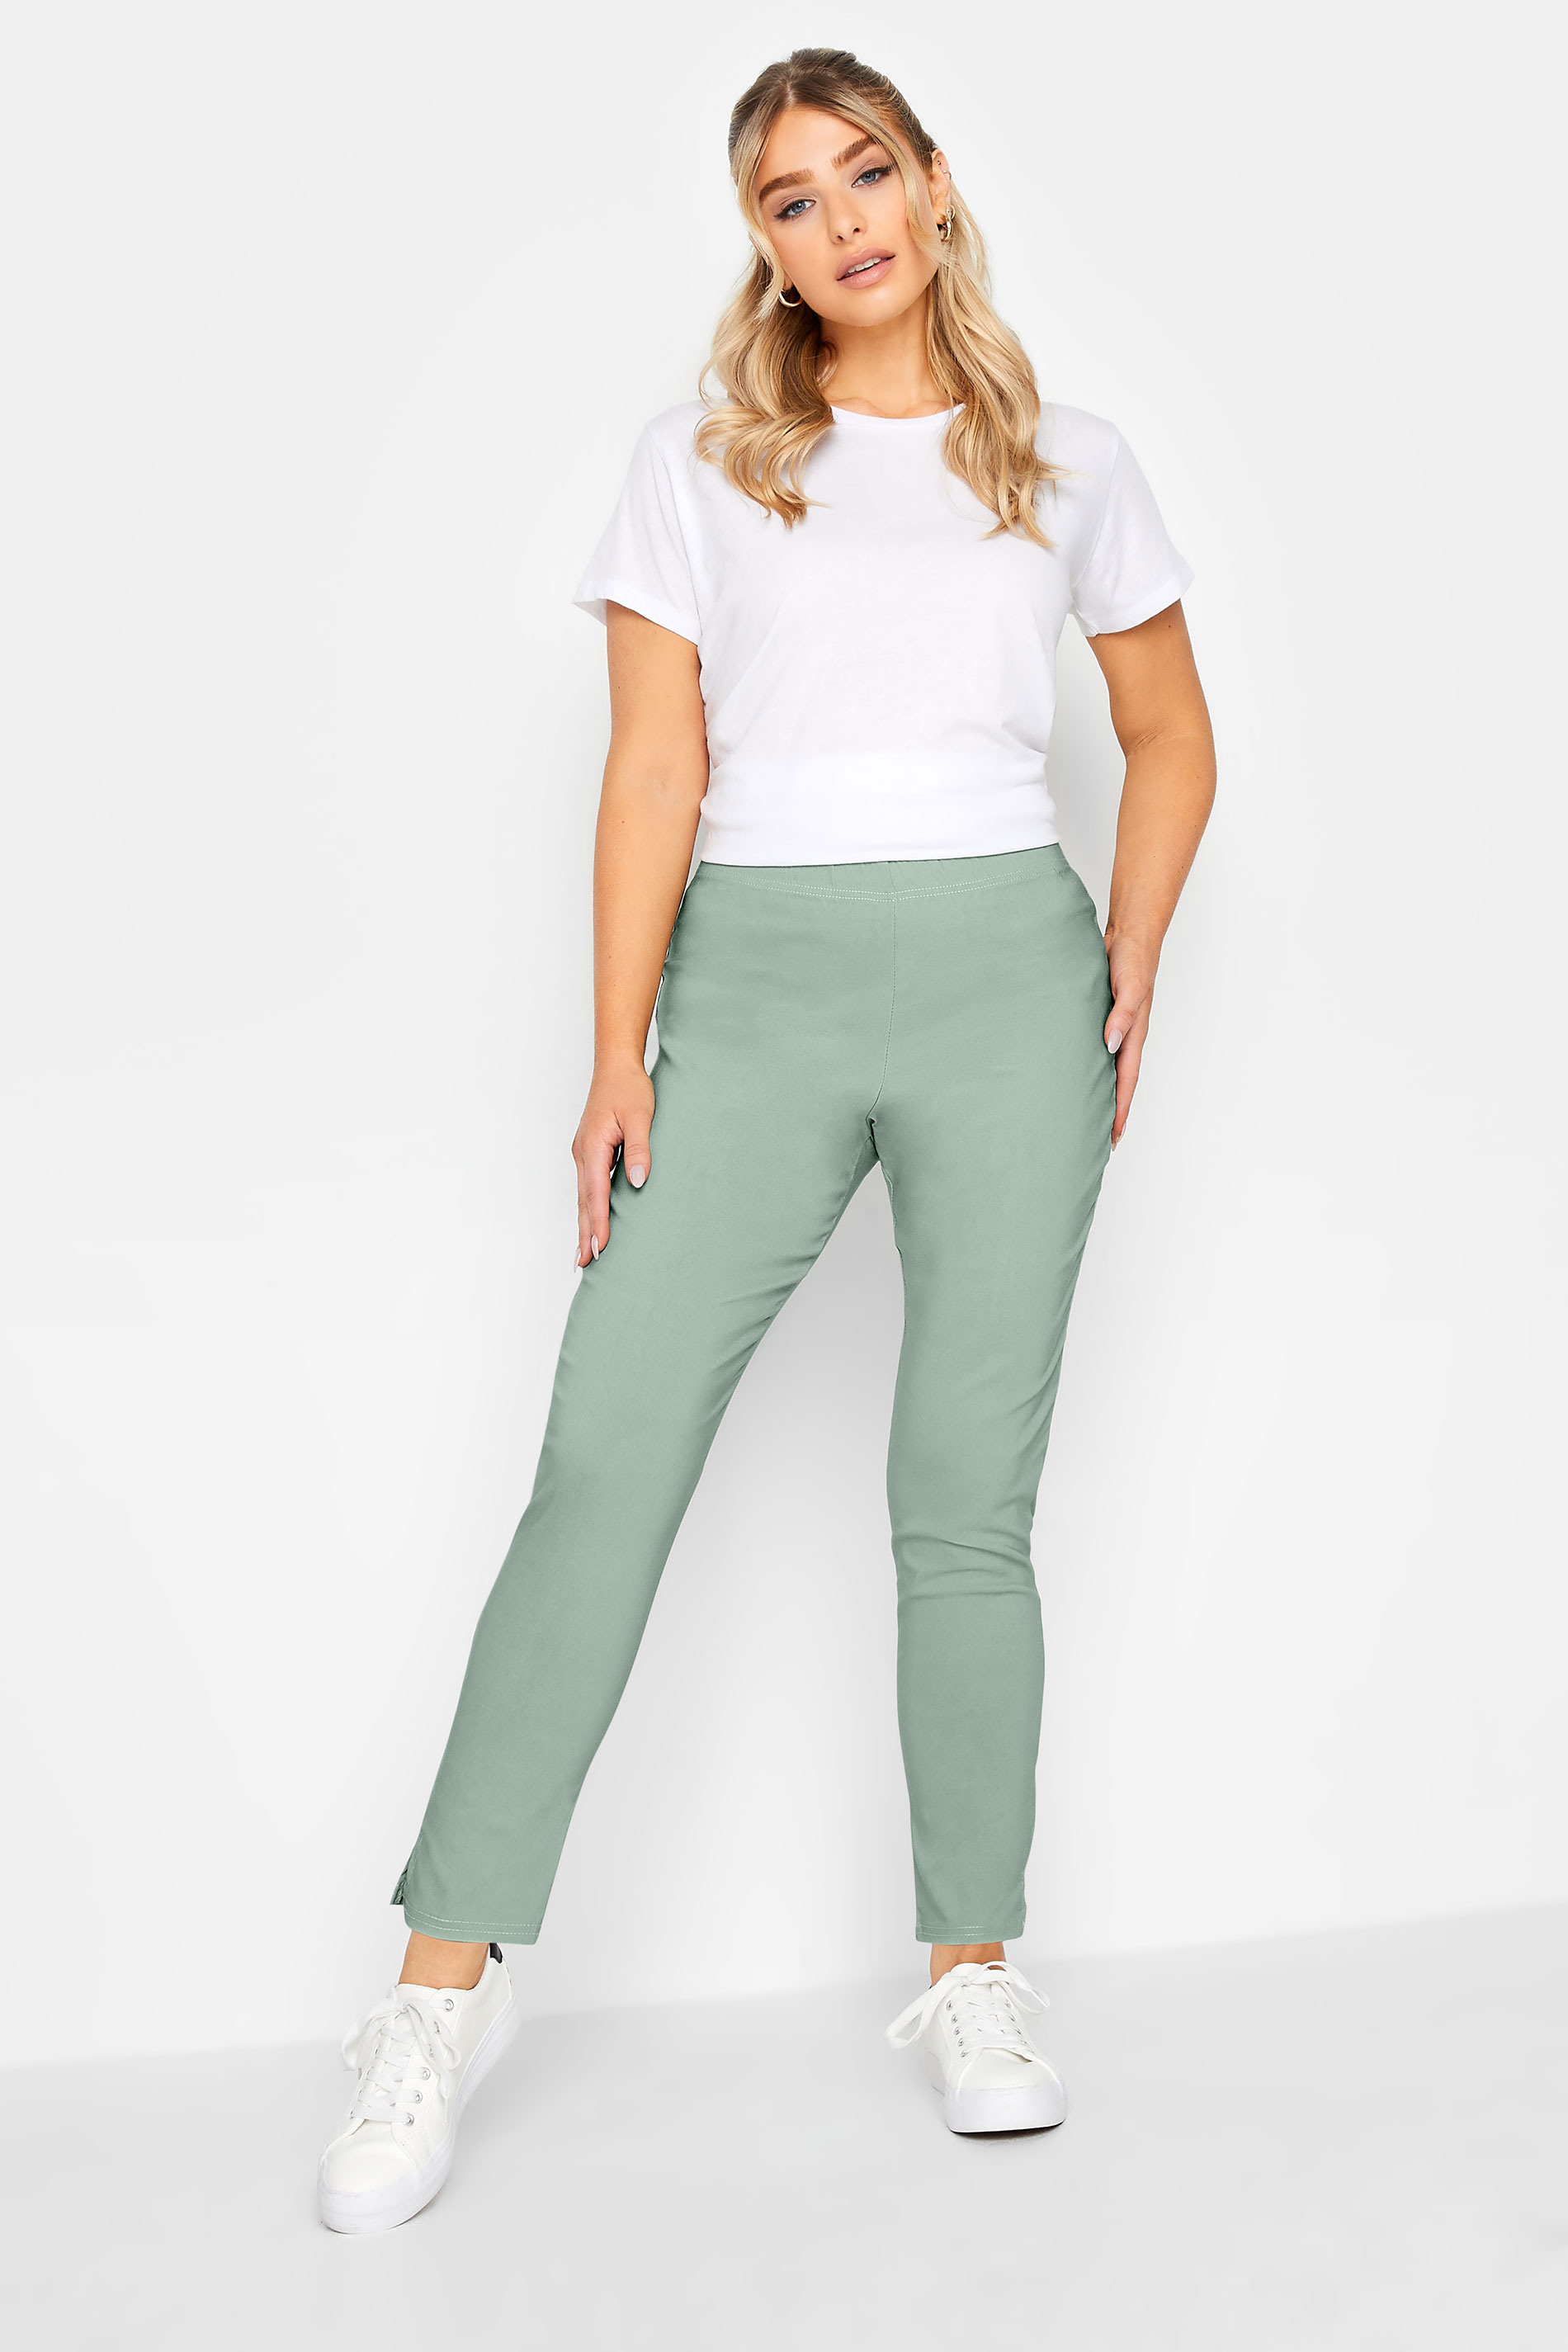 M&Co Sage Green Stretch Bengaline Trousers | M&Co 2